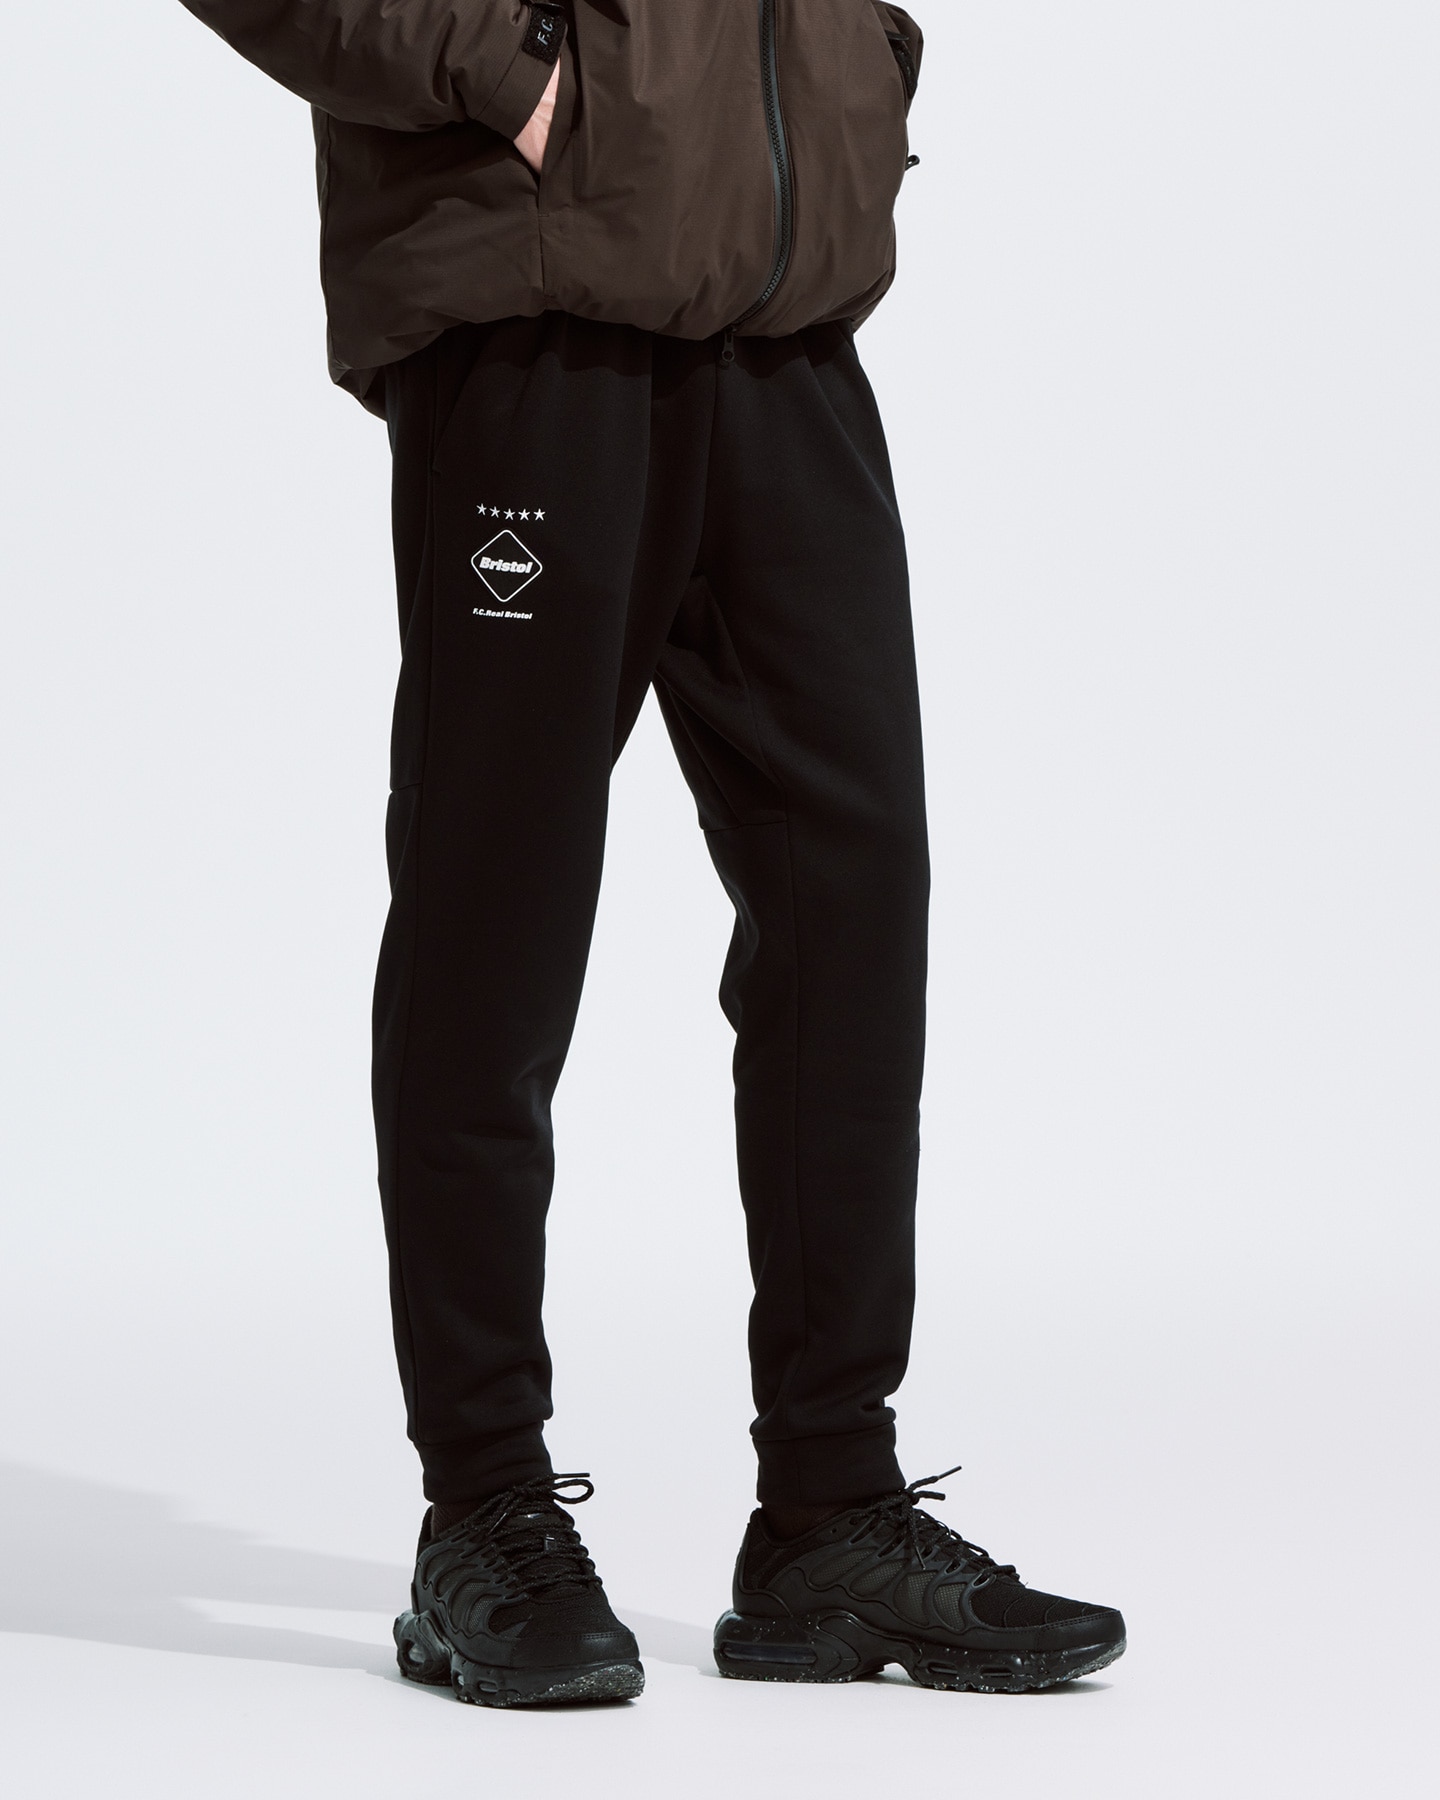 SOPH. | POLARTEC POWER STRETCH TRAINING RIBBED PANTS(S BROWN):